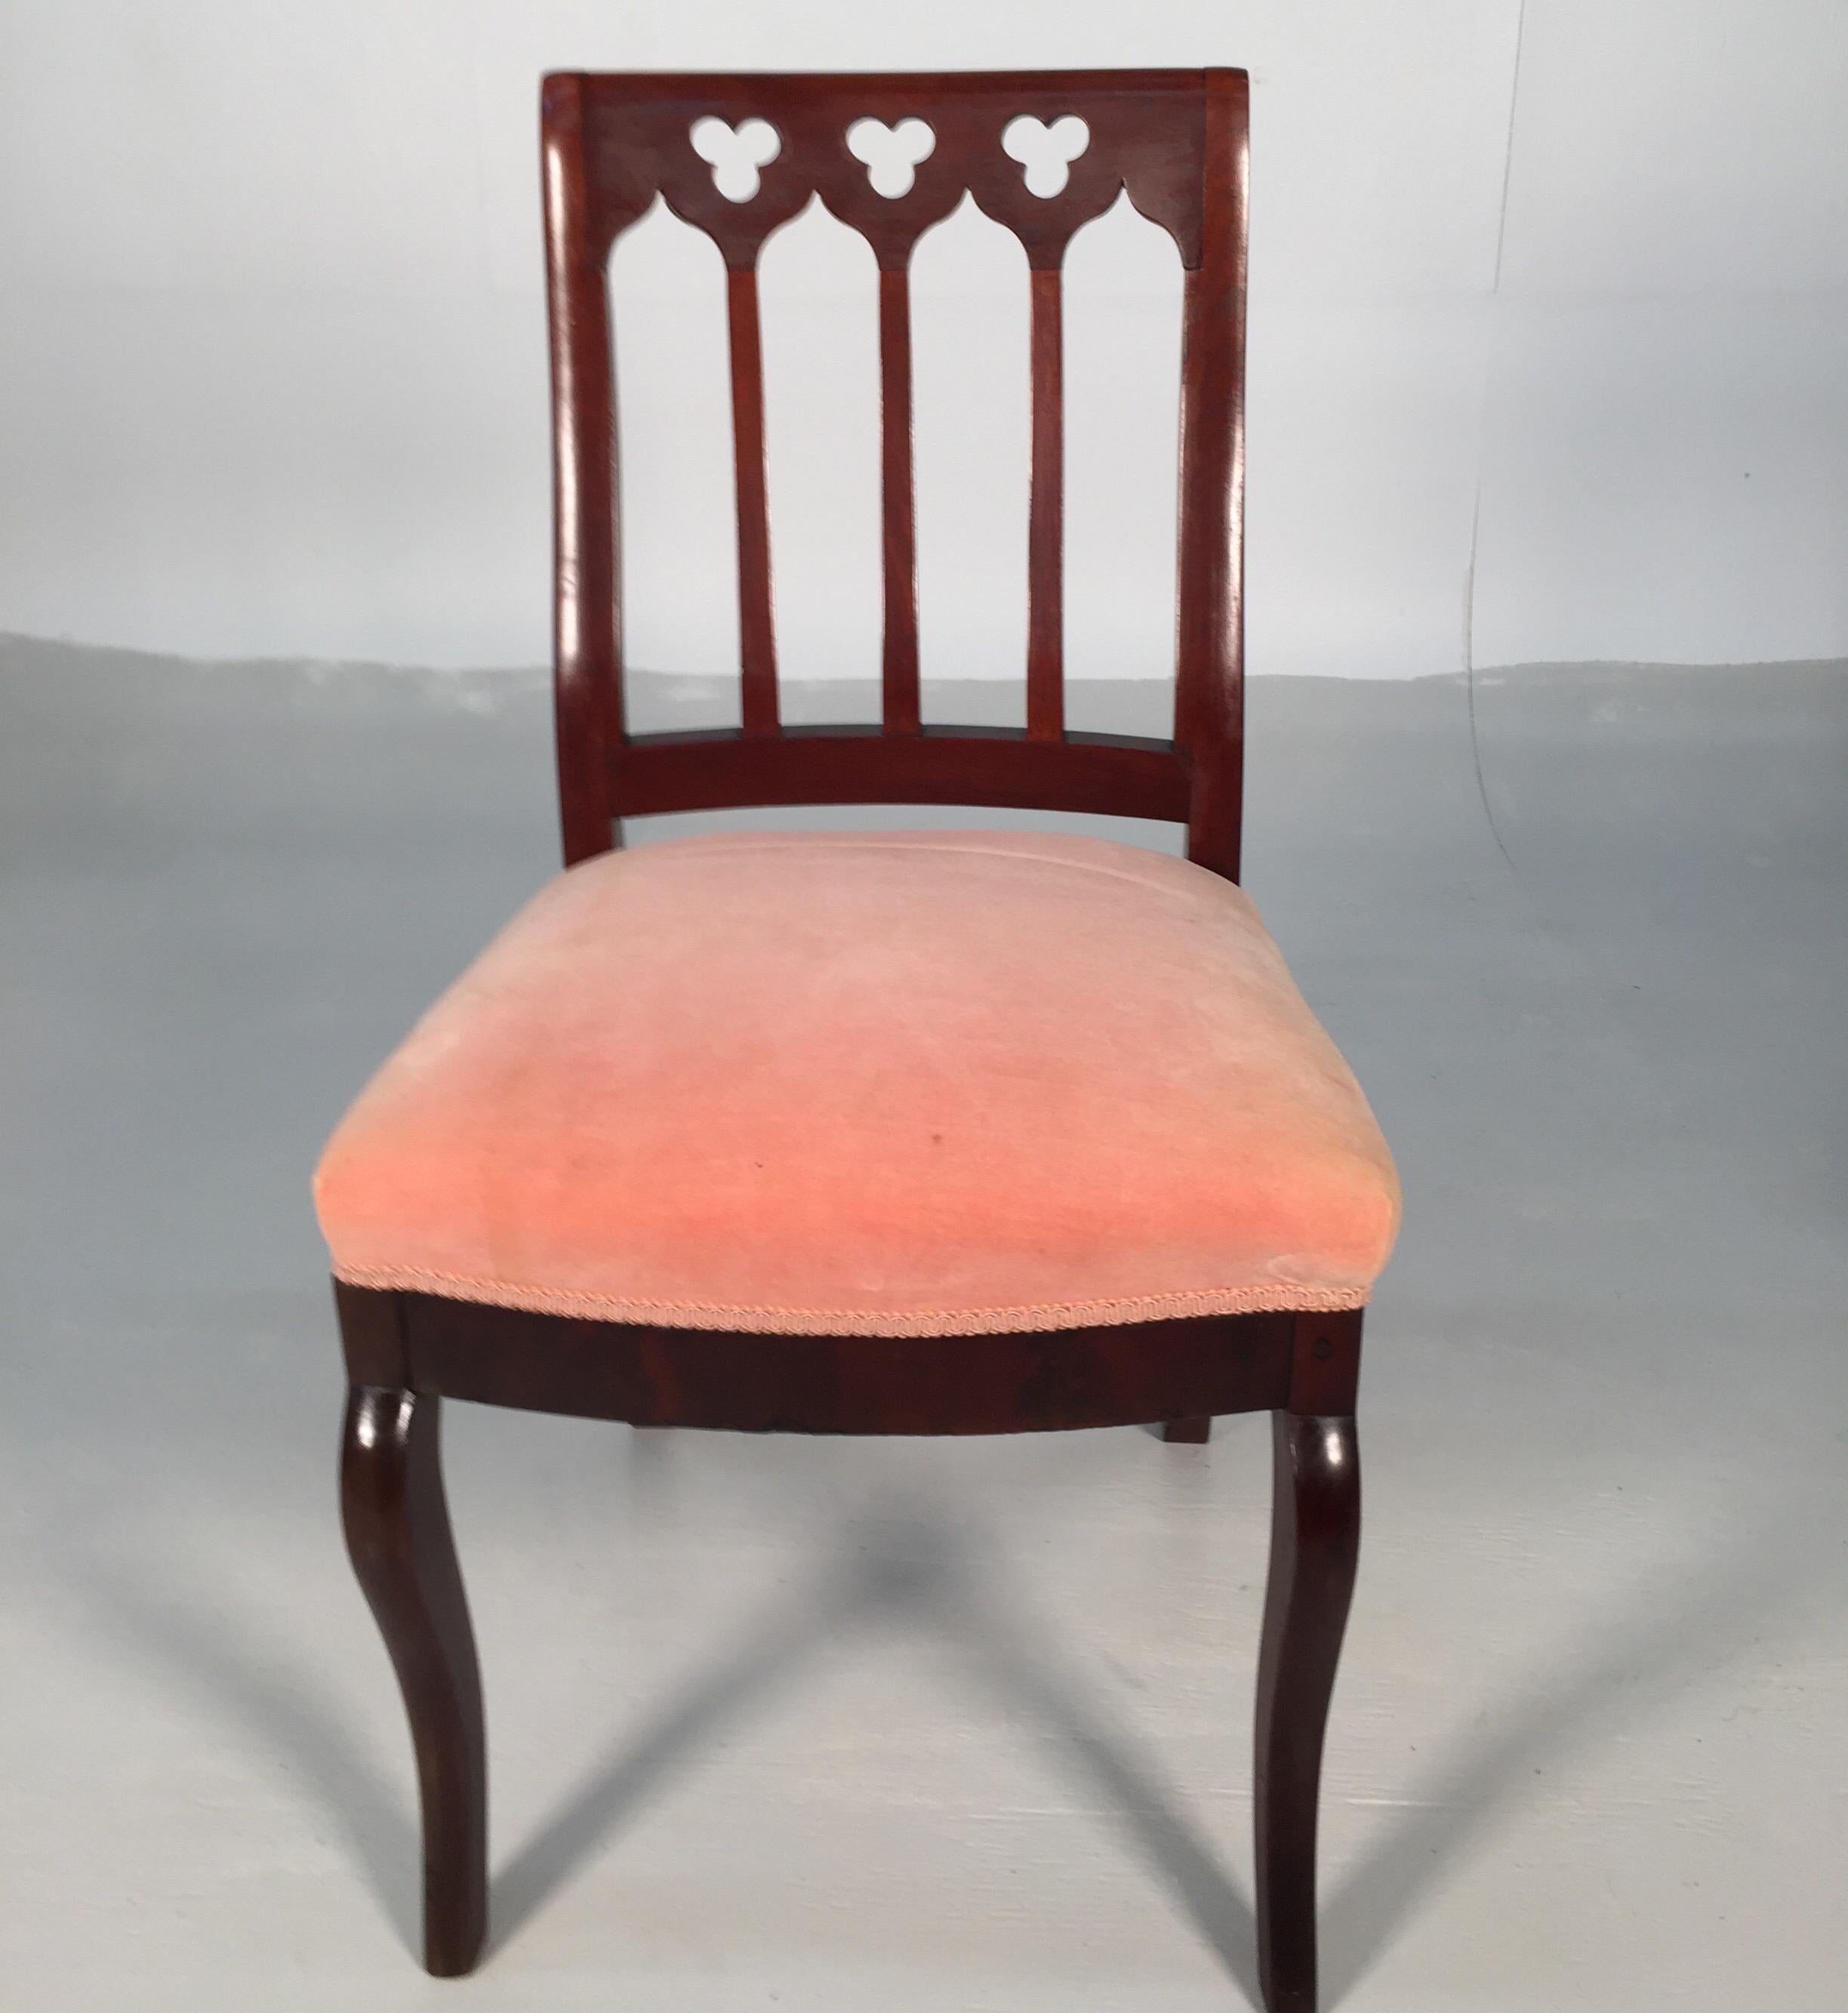 American Set of 10, circa 1850s Gothic Revival Upholstered Dining Chairs, by John Jelliff